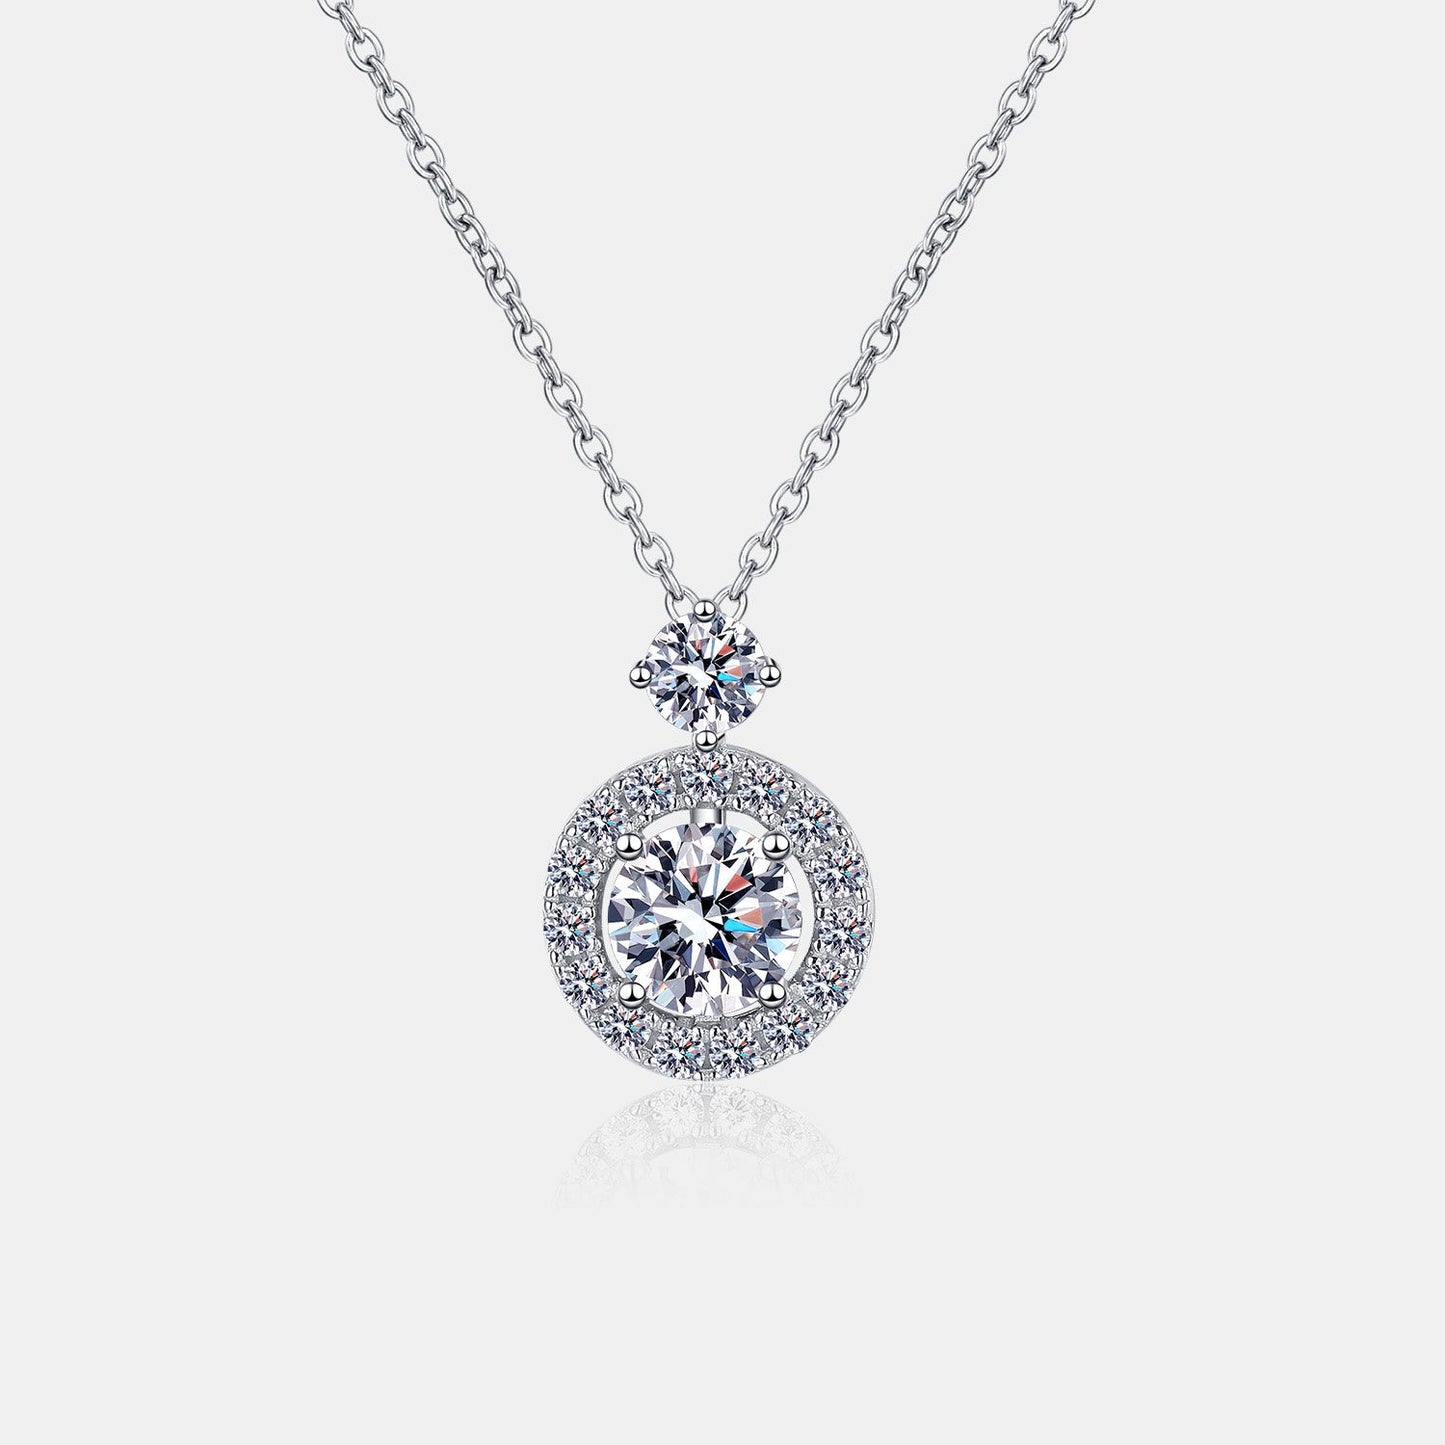 Beach Rose Co.Silver Round 1.3 Carat Moissanite Solitaire Pendant Necklace